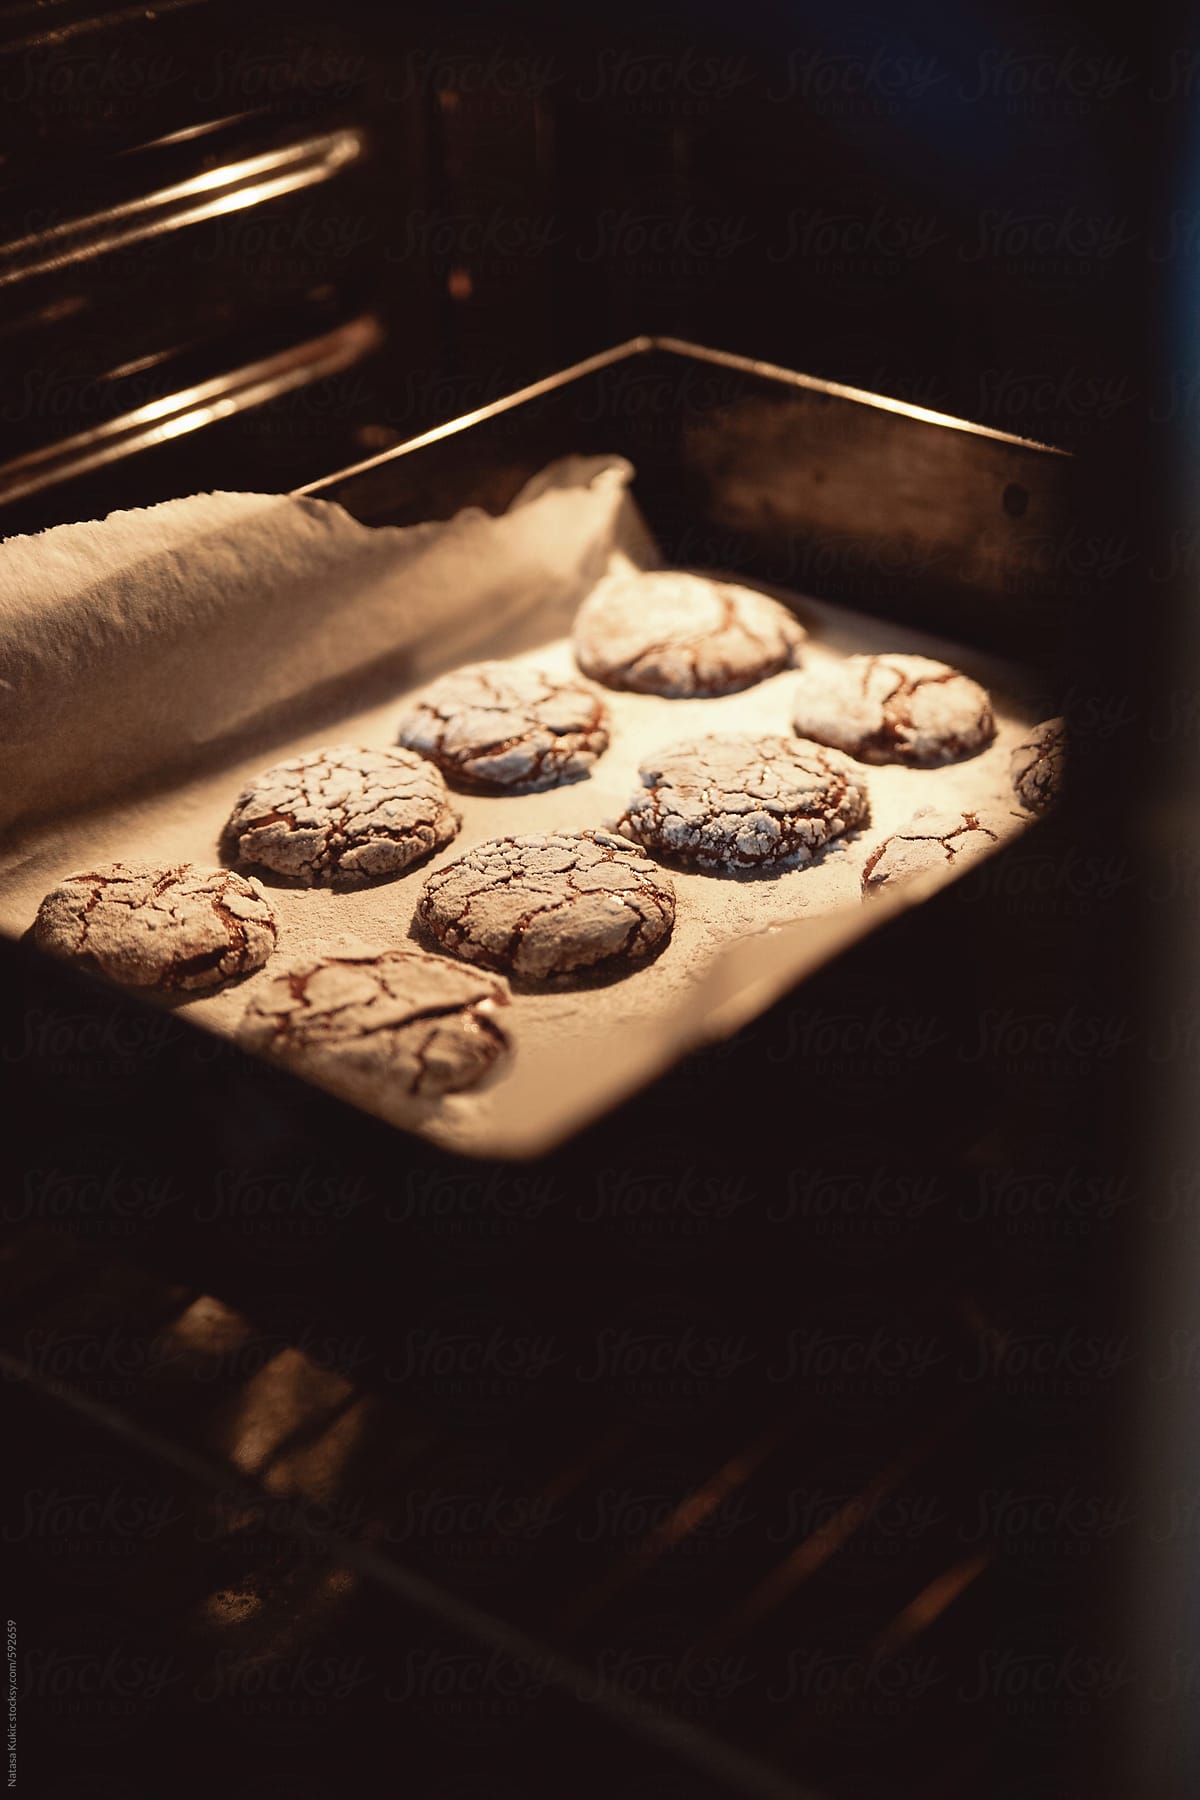 Chocolate cookies baking in the oven